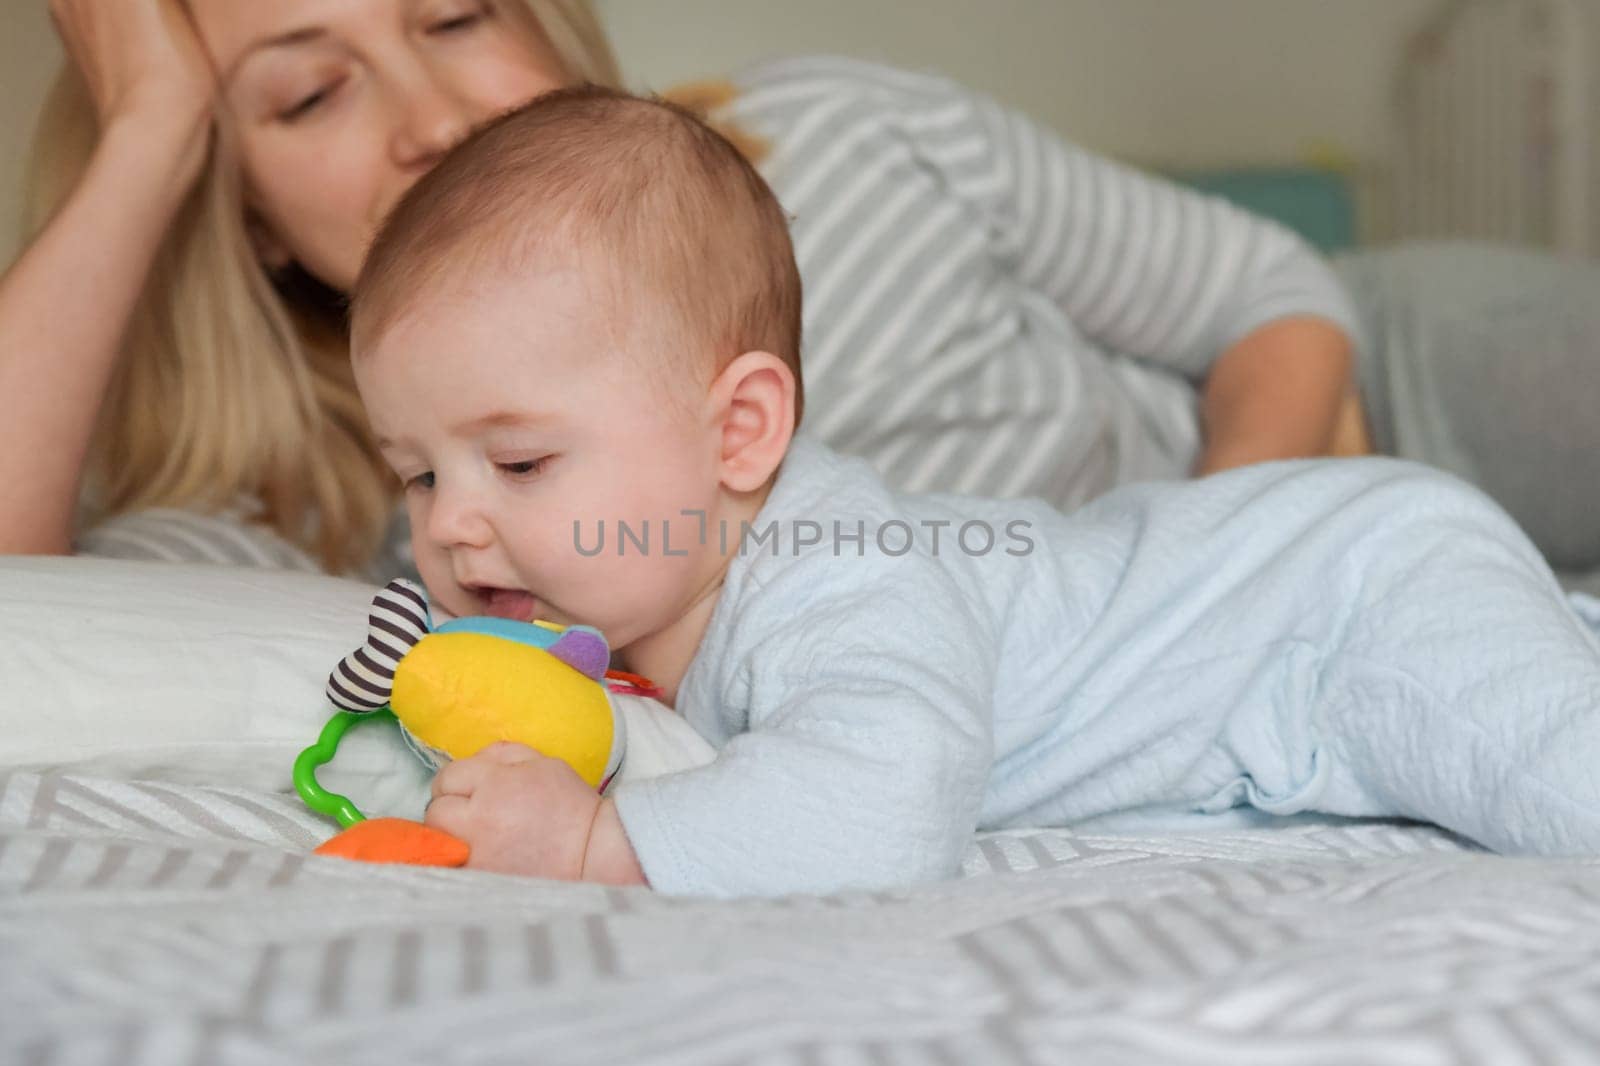 Mother looks at a her baby as he plays